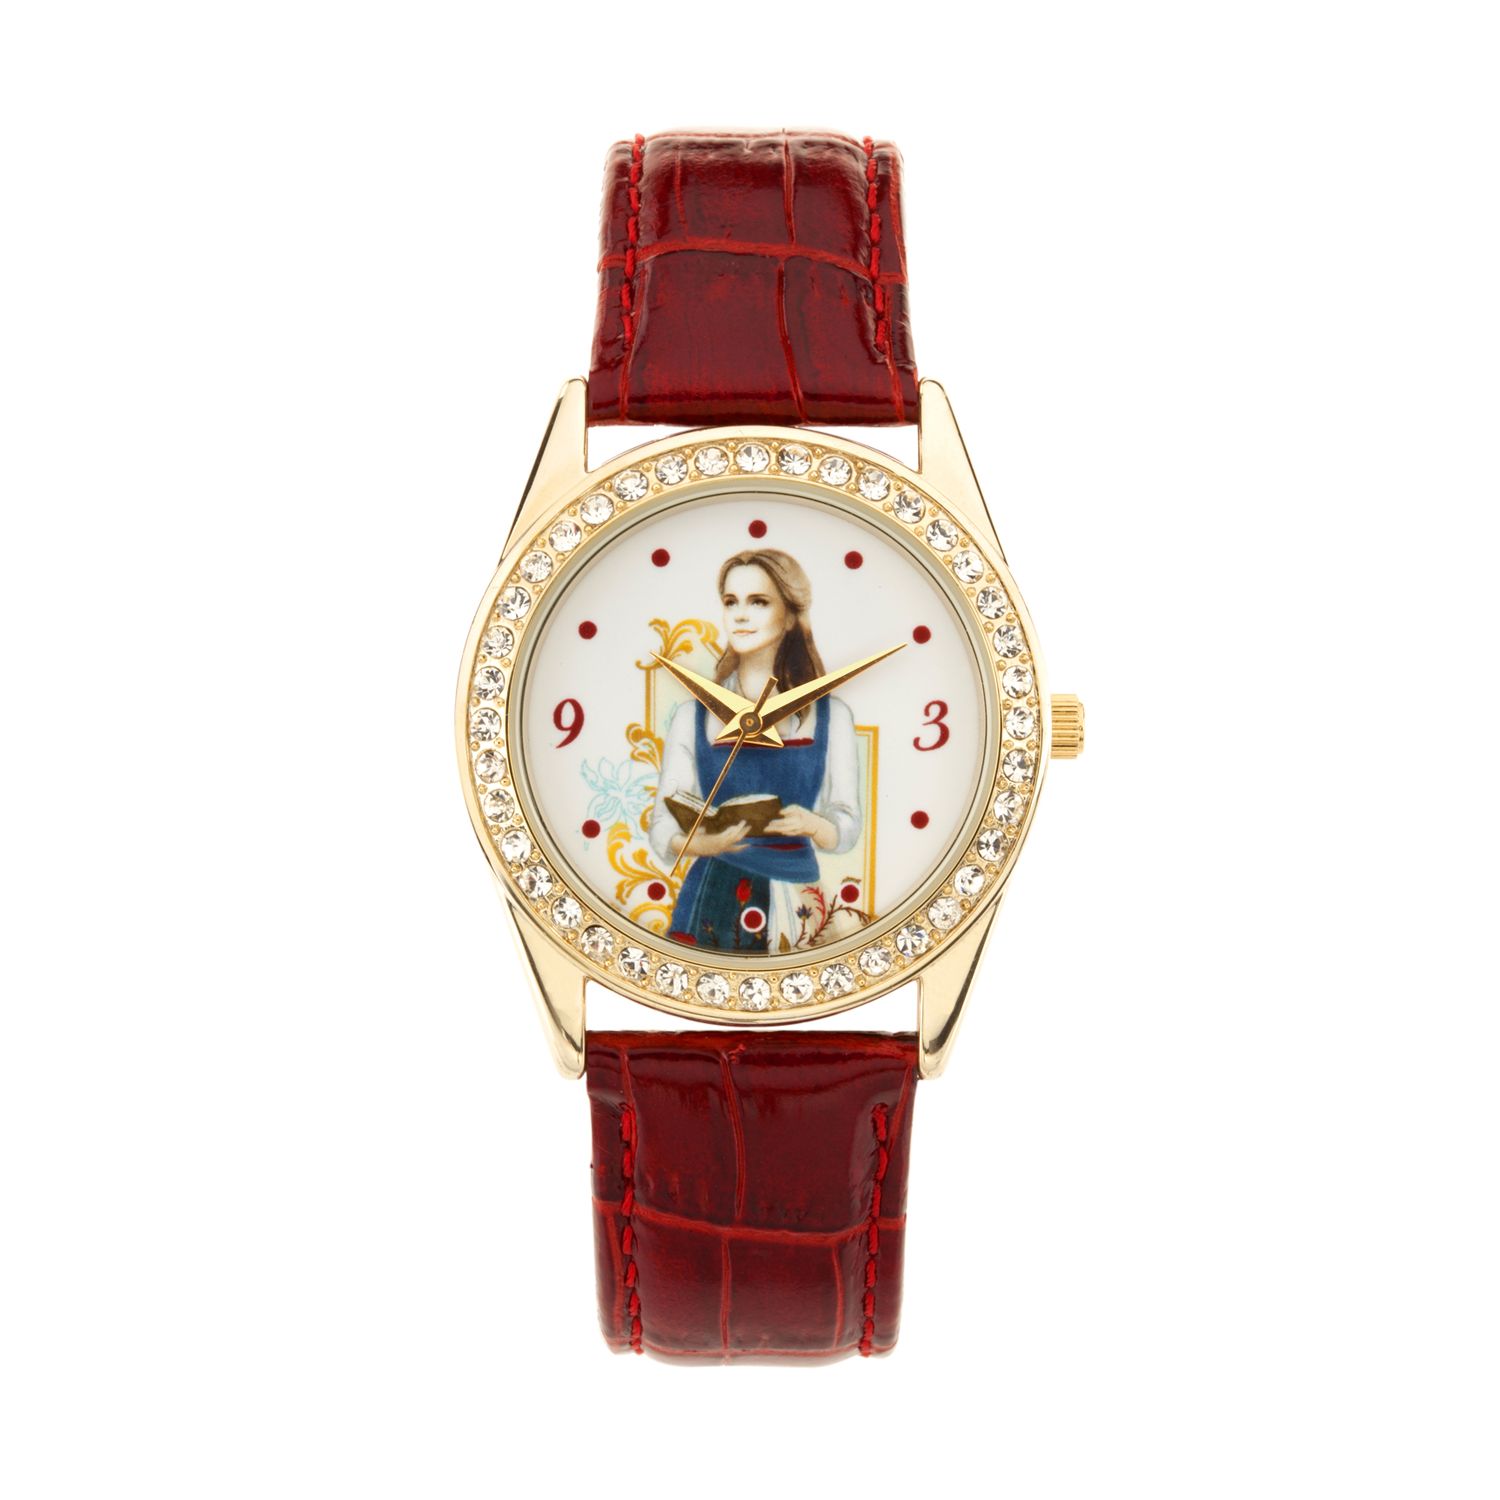 Image for Disney 's Beauty and the Beast Princess Belle Women's Crystal Leather Watch at Kohl's.